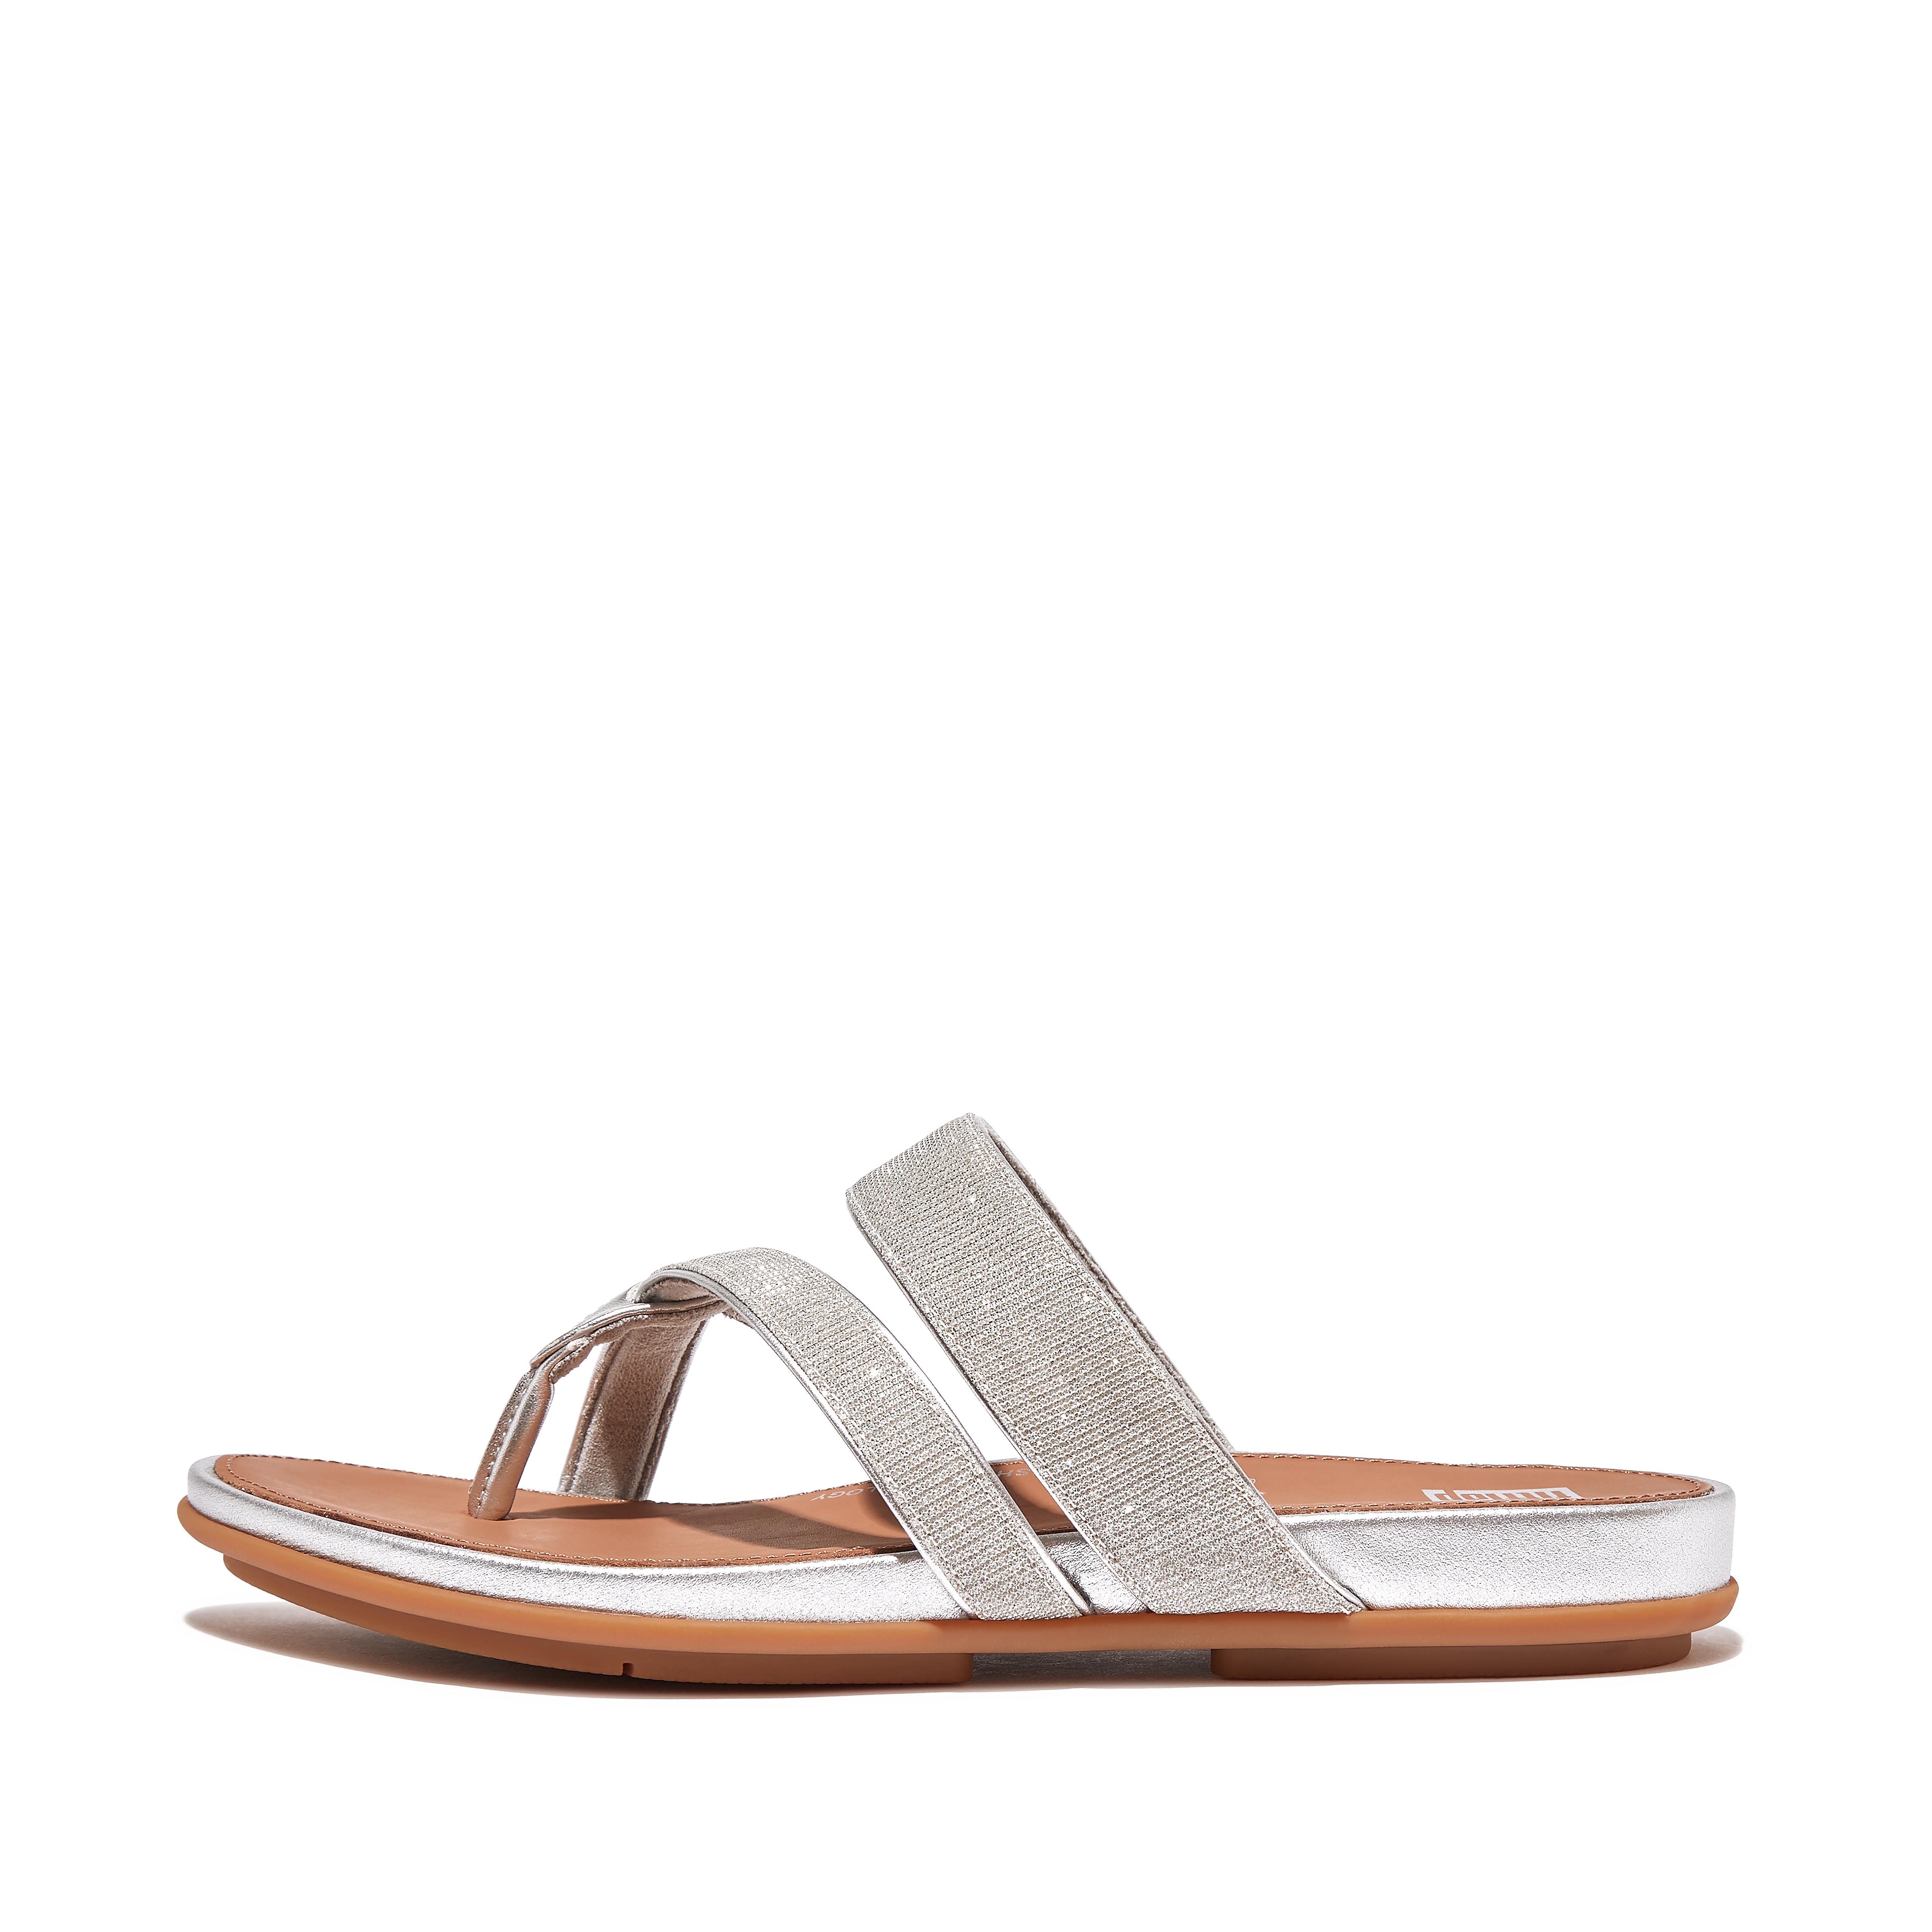 Fitflop Shimmerlux Strappy Toe-Post Sandals,Silver